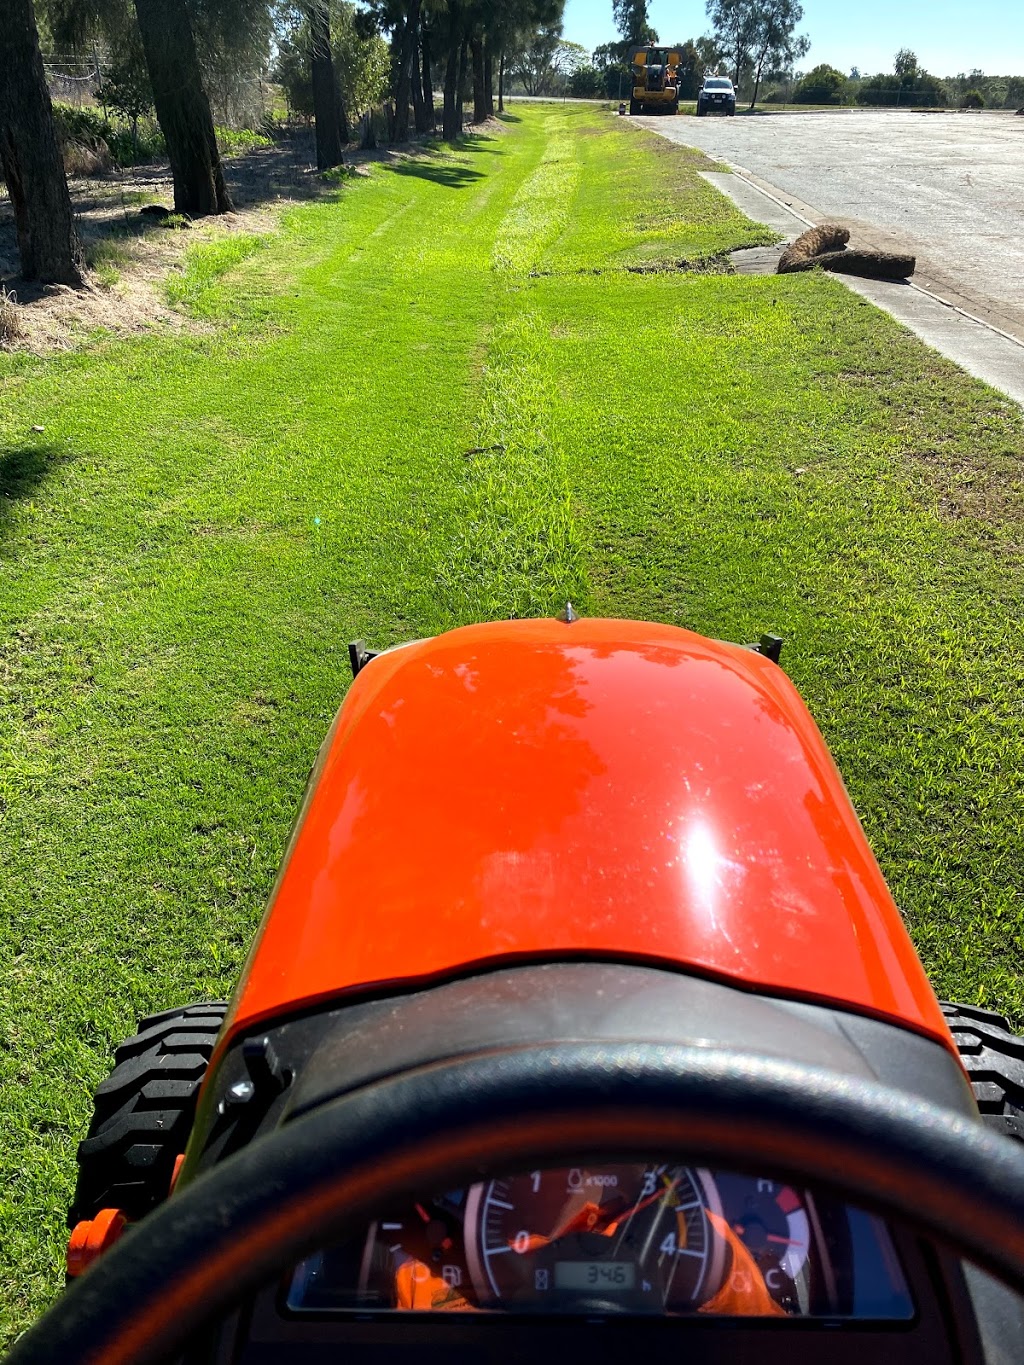 Tims Mowing And Slashing |  | 50 Casuarina Dr S, Bray Park QLD 4500, Australia | 0434554773 OR +61 434 554 773